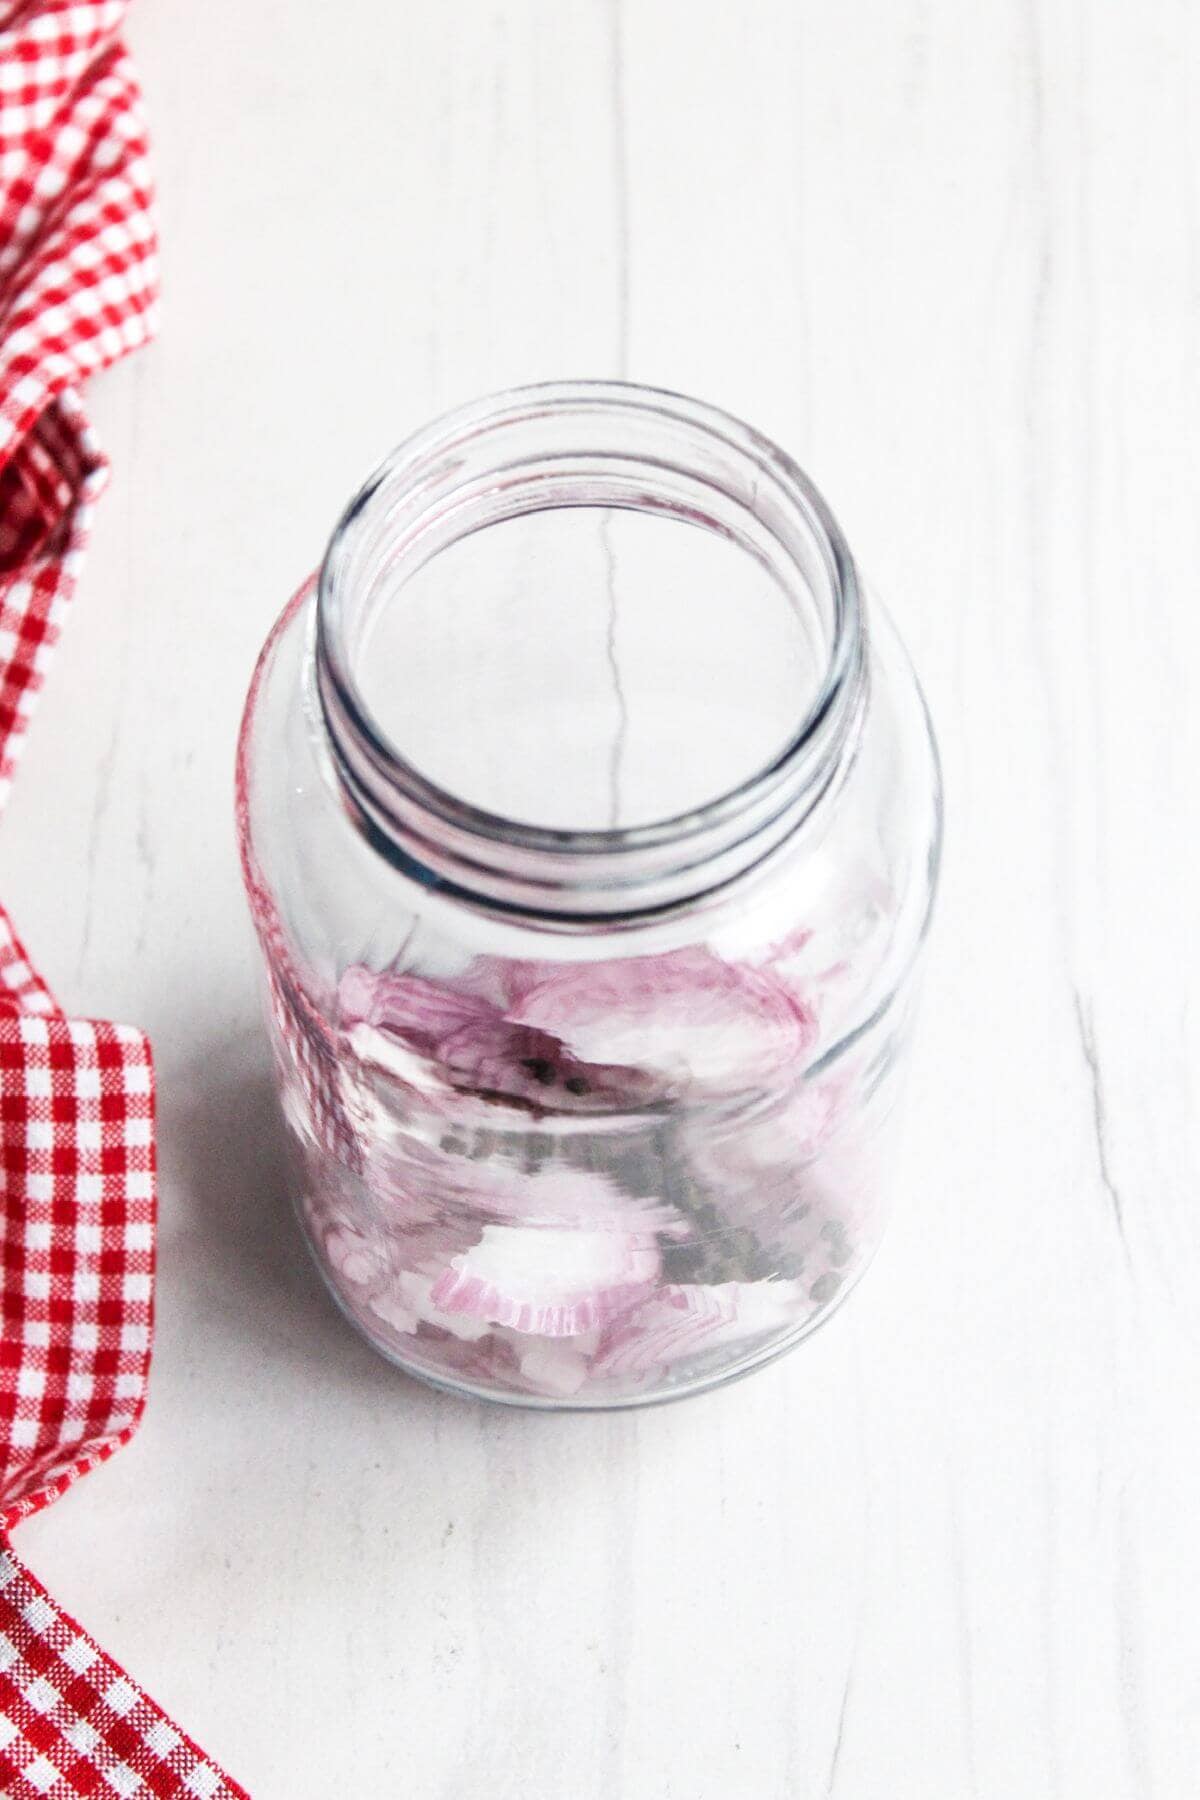 A glass jar with sliced red onions in it.